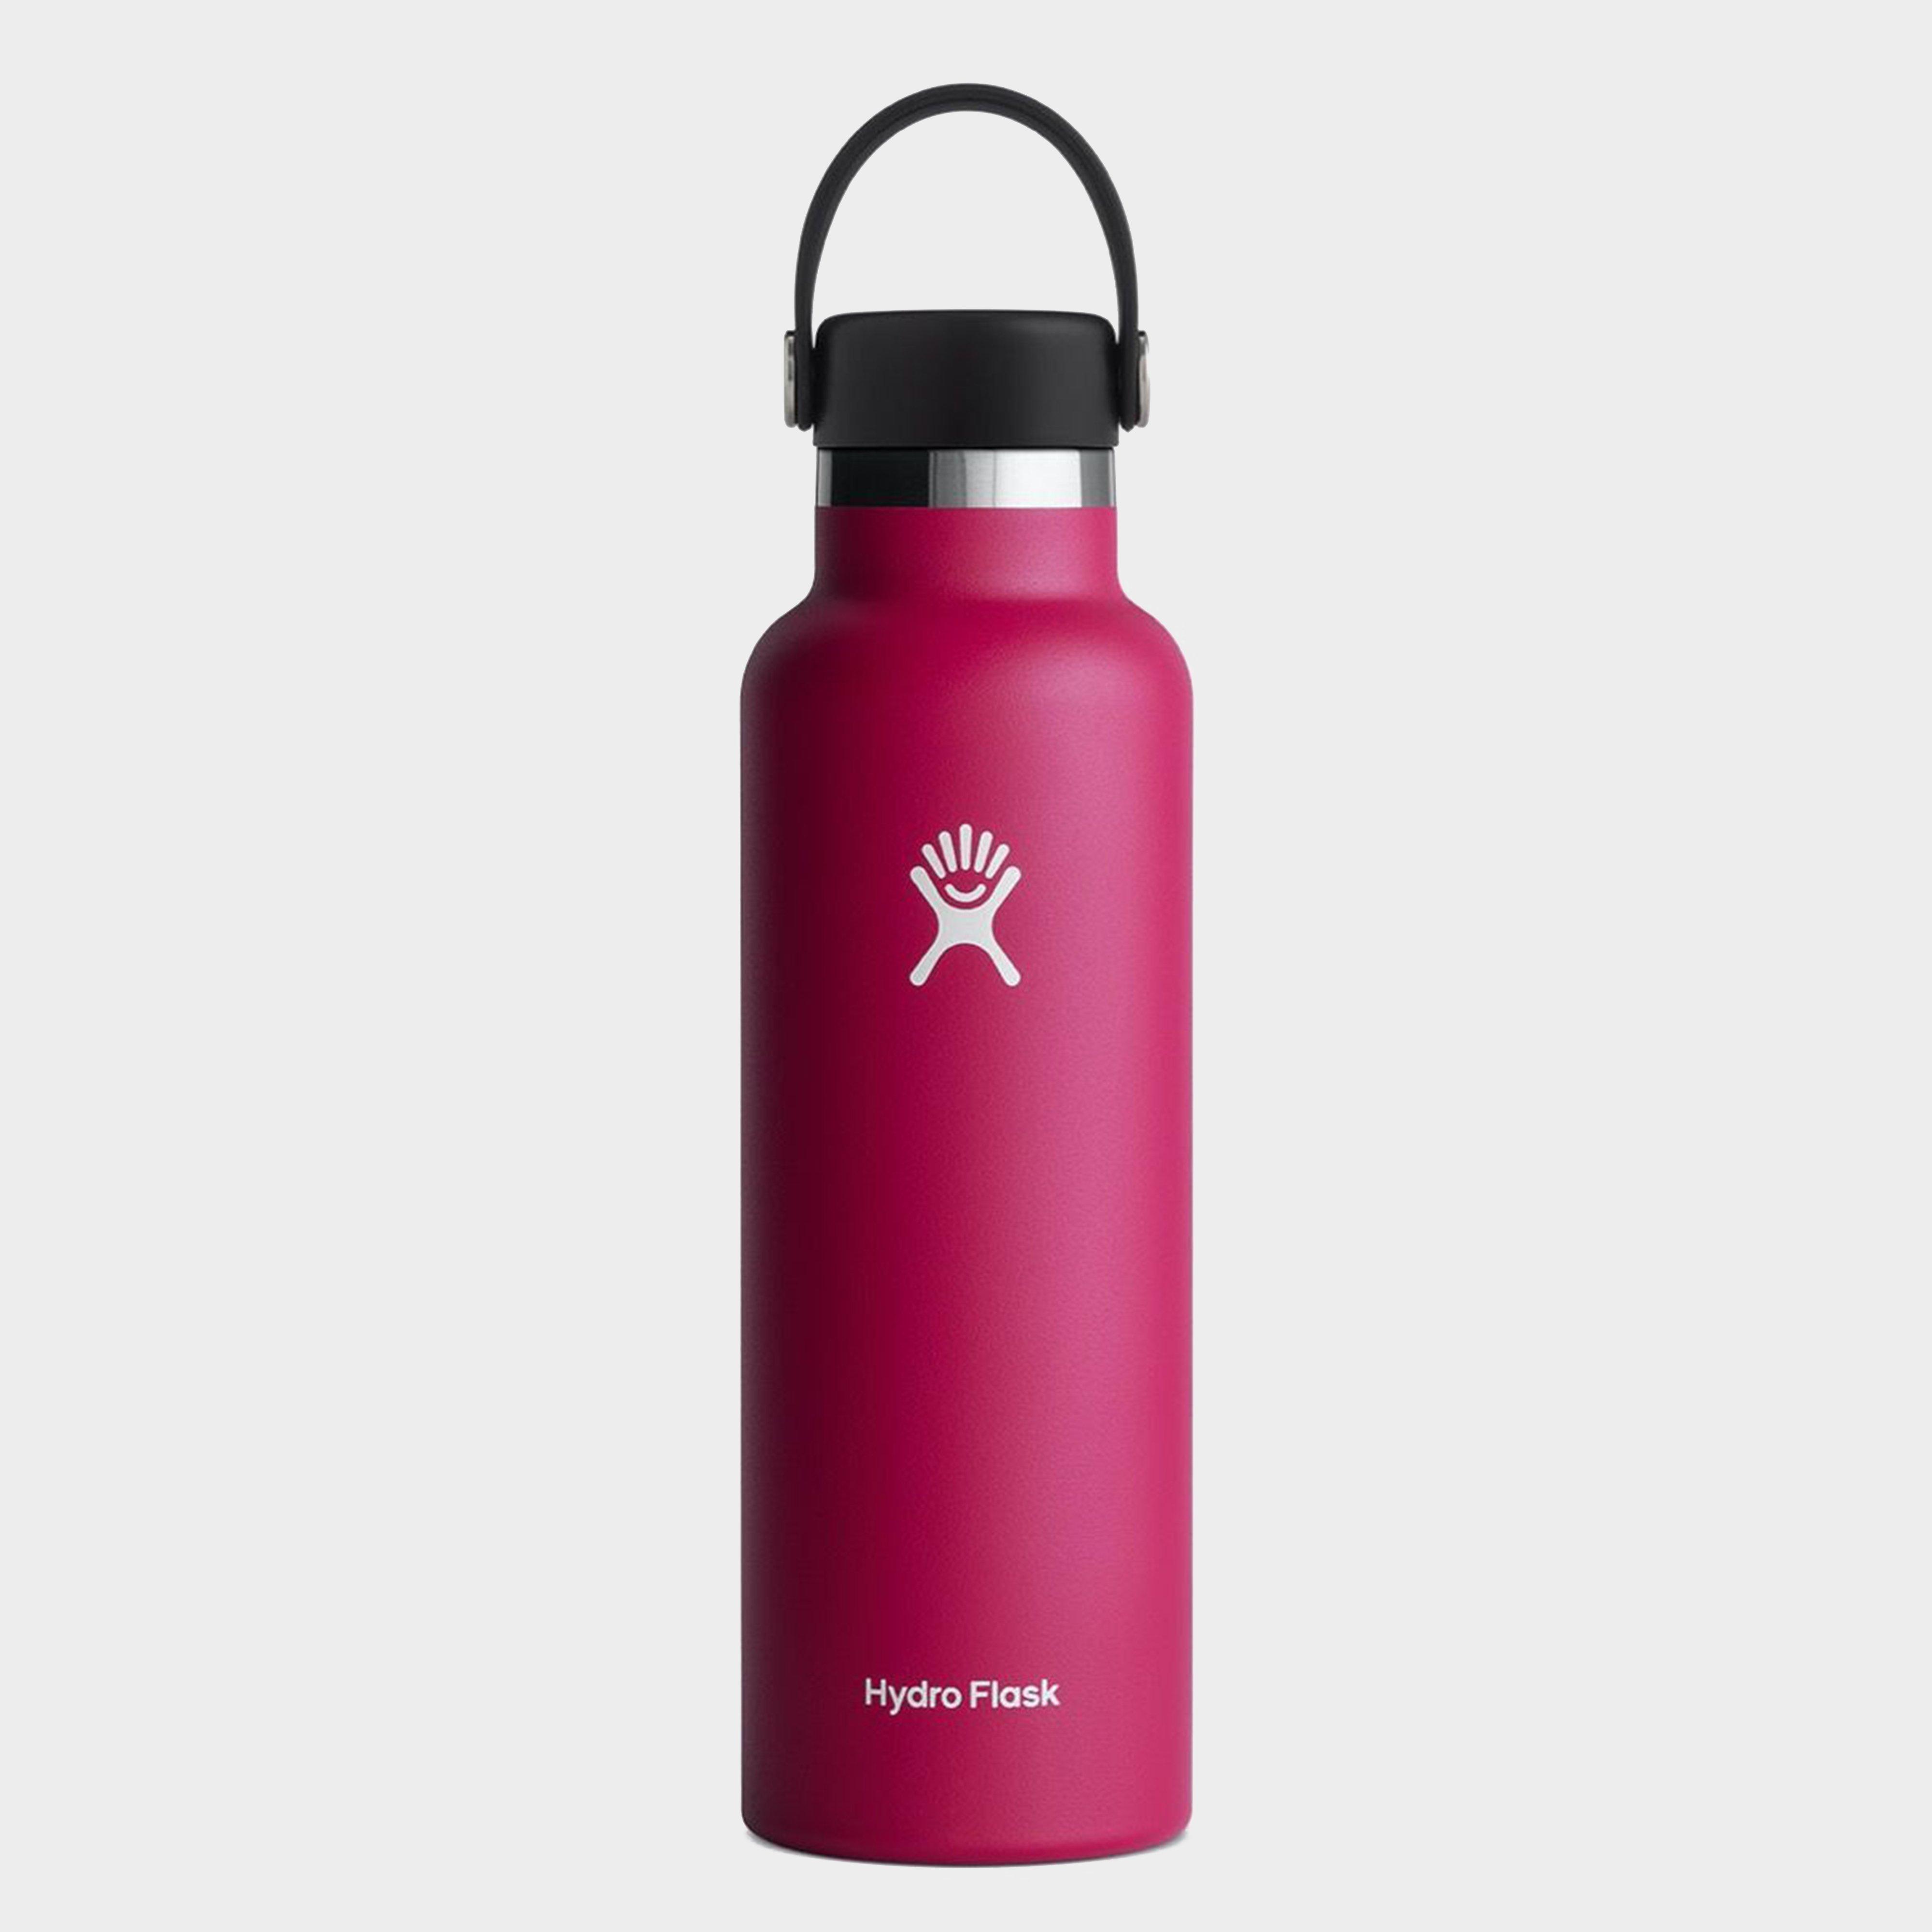 Hydro Flask 21oz Standard Mouth Flask - Red/red  Red/red